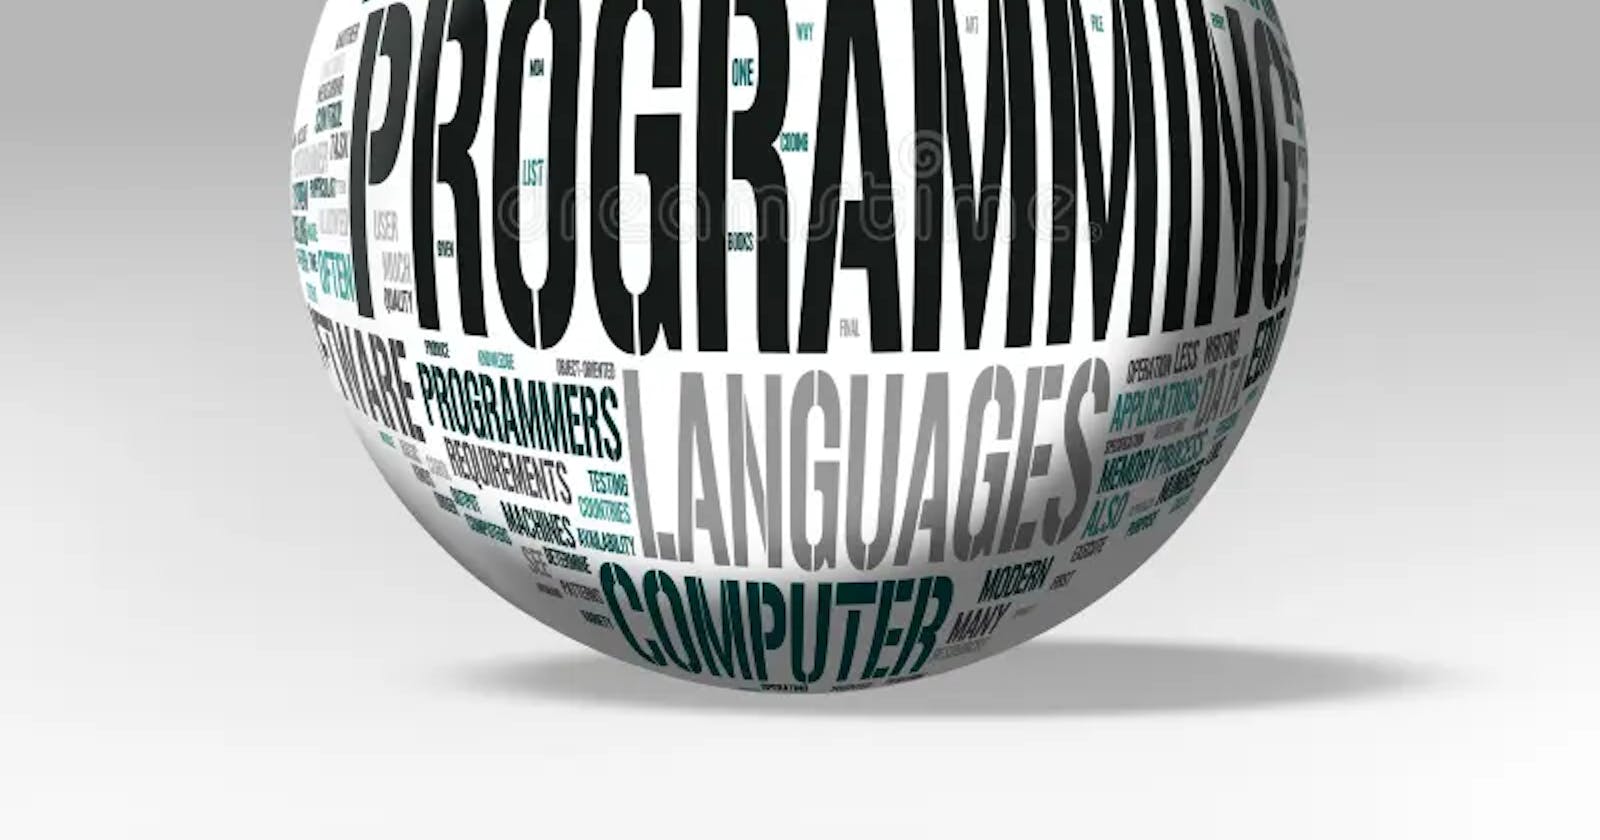 Basic Concepts of Programming Languages - Overview